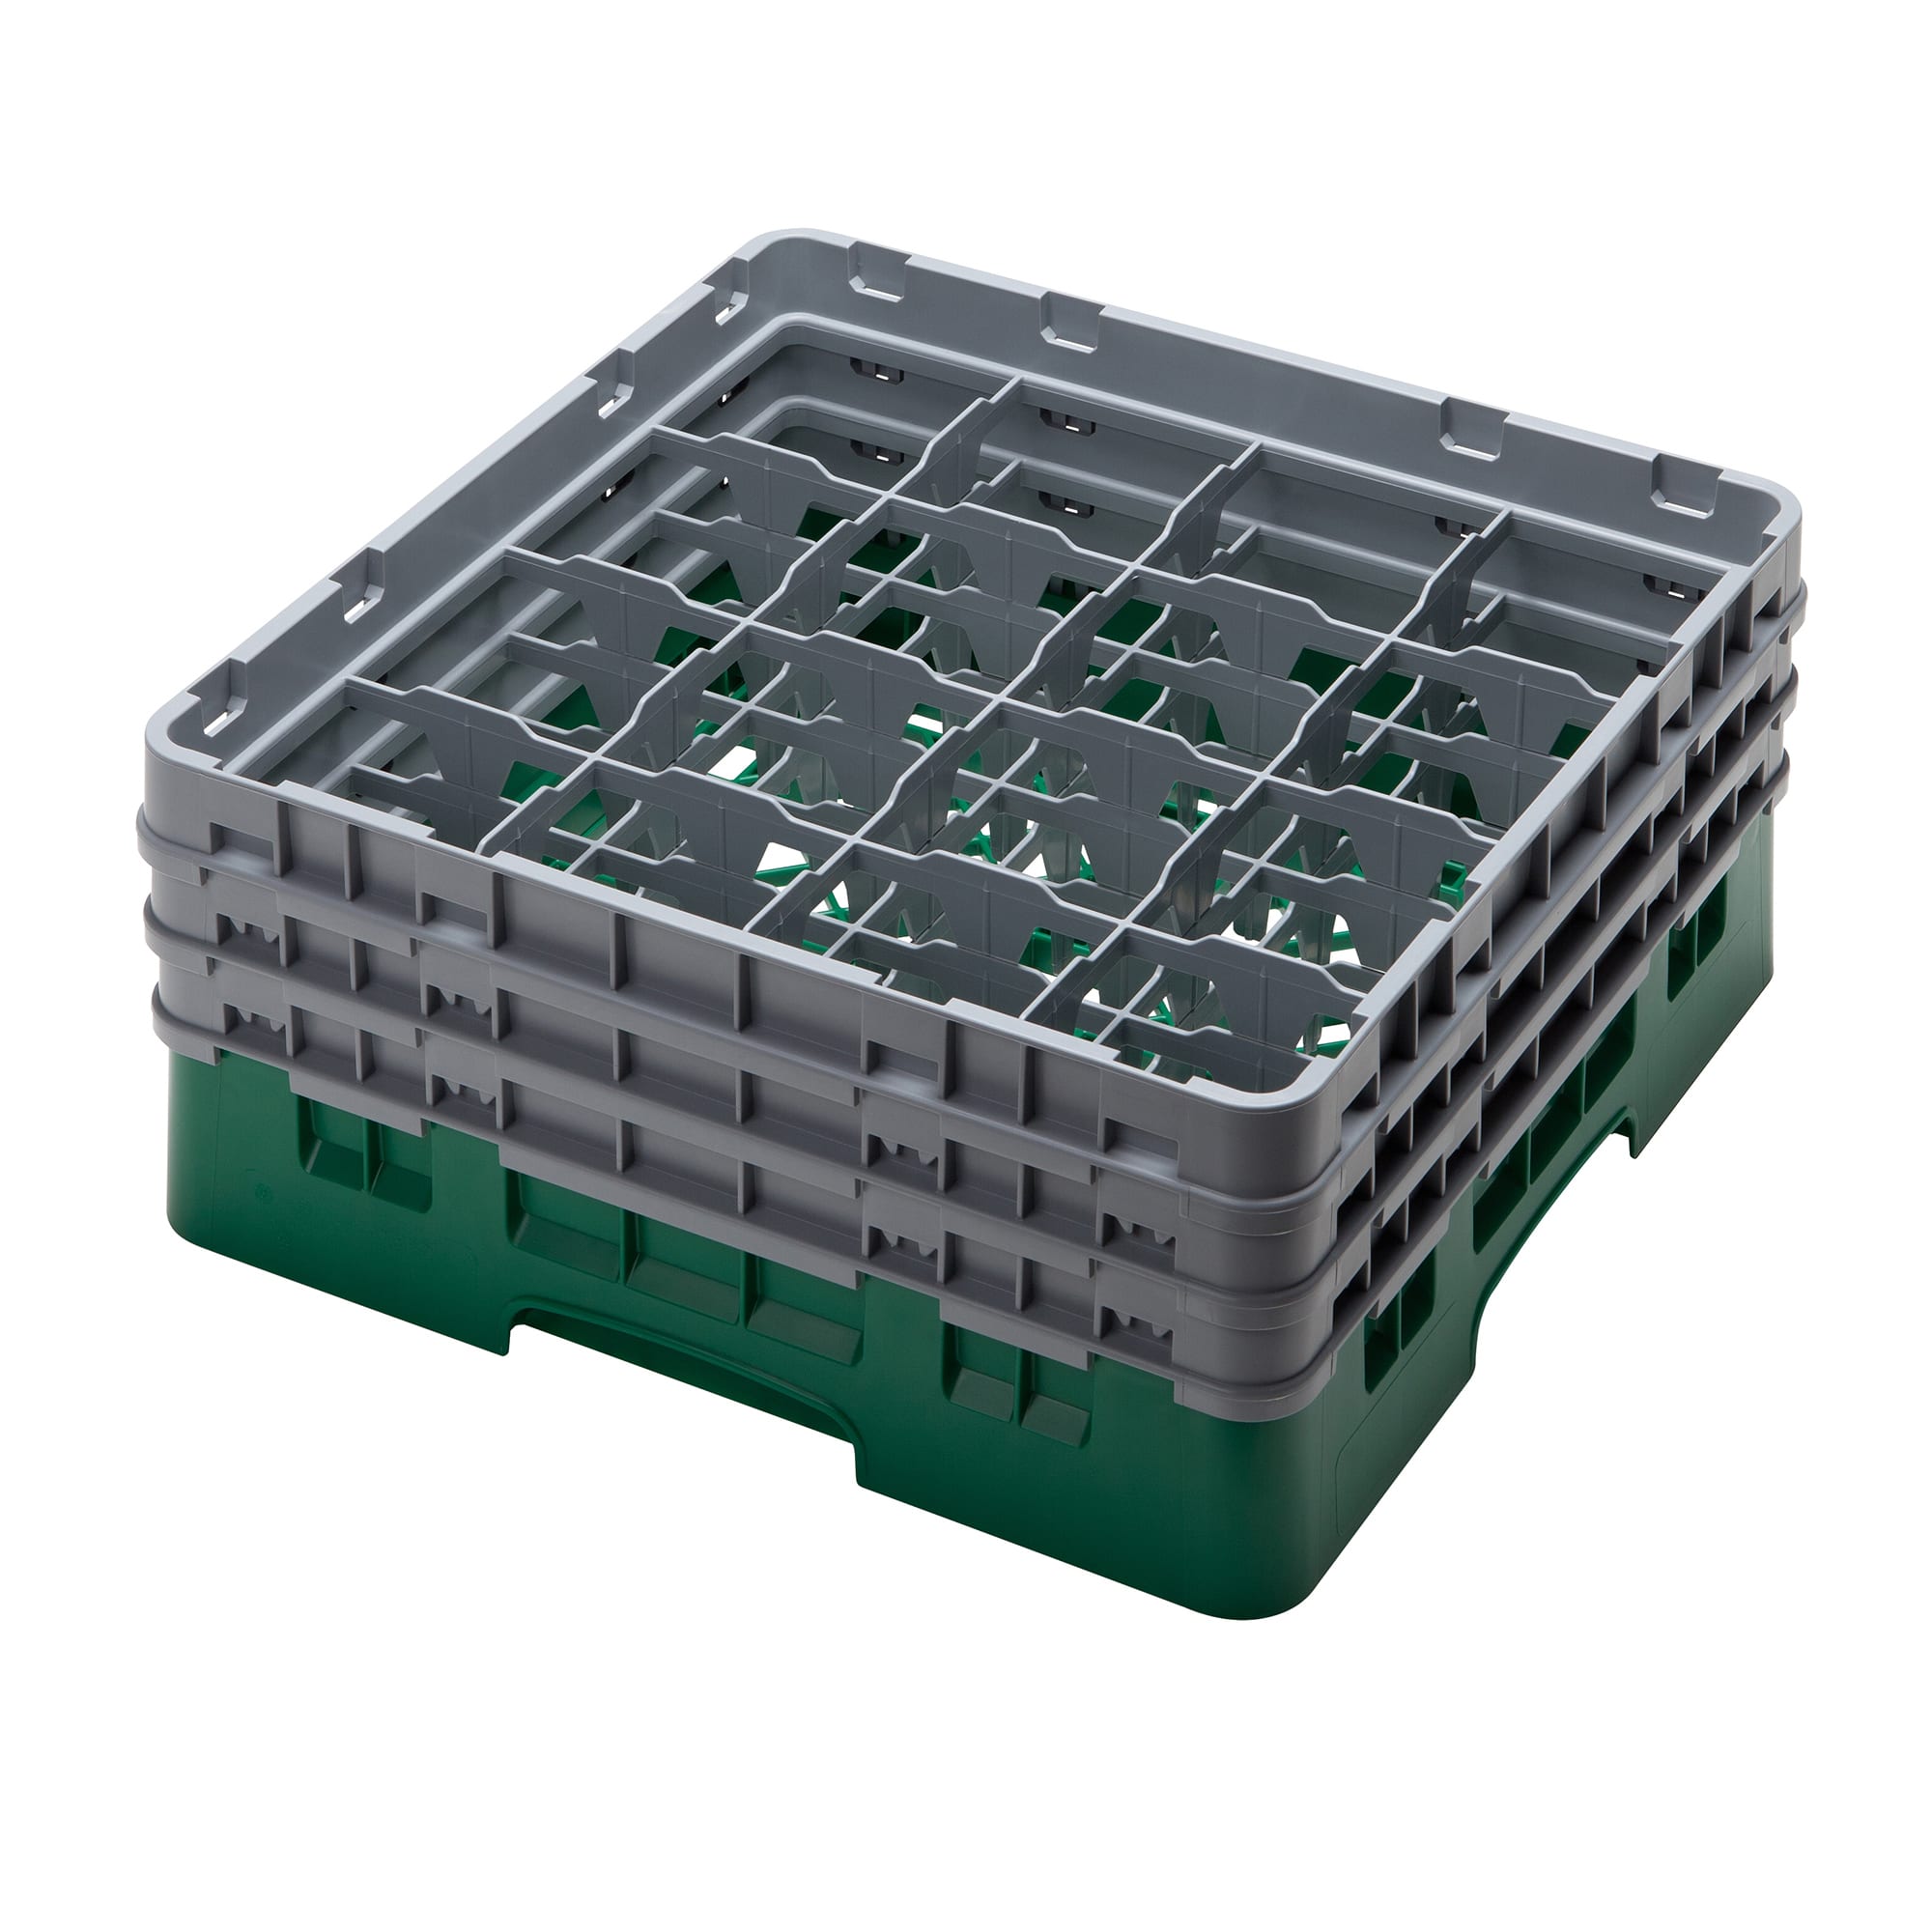 Cambro® 16S638119 Camrack® Green 16 Compartment Glass Rack